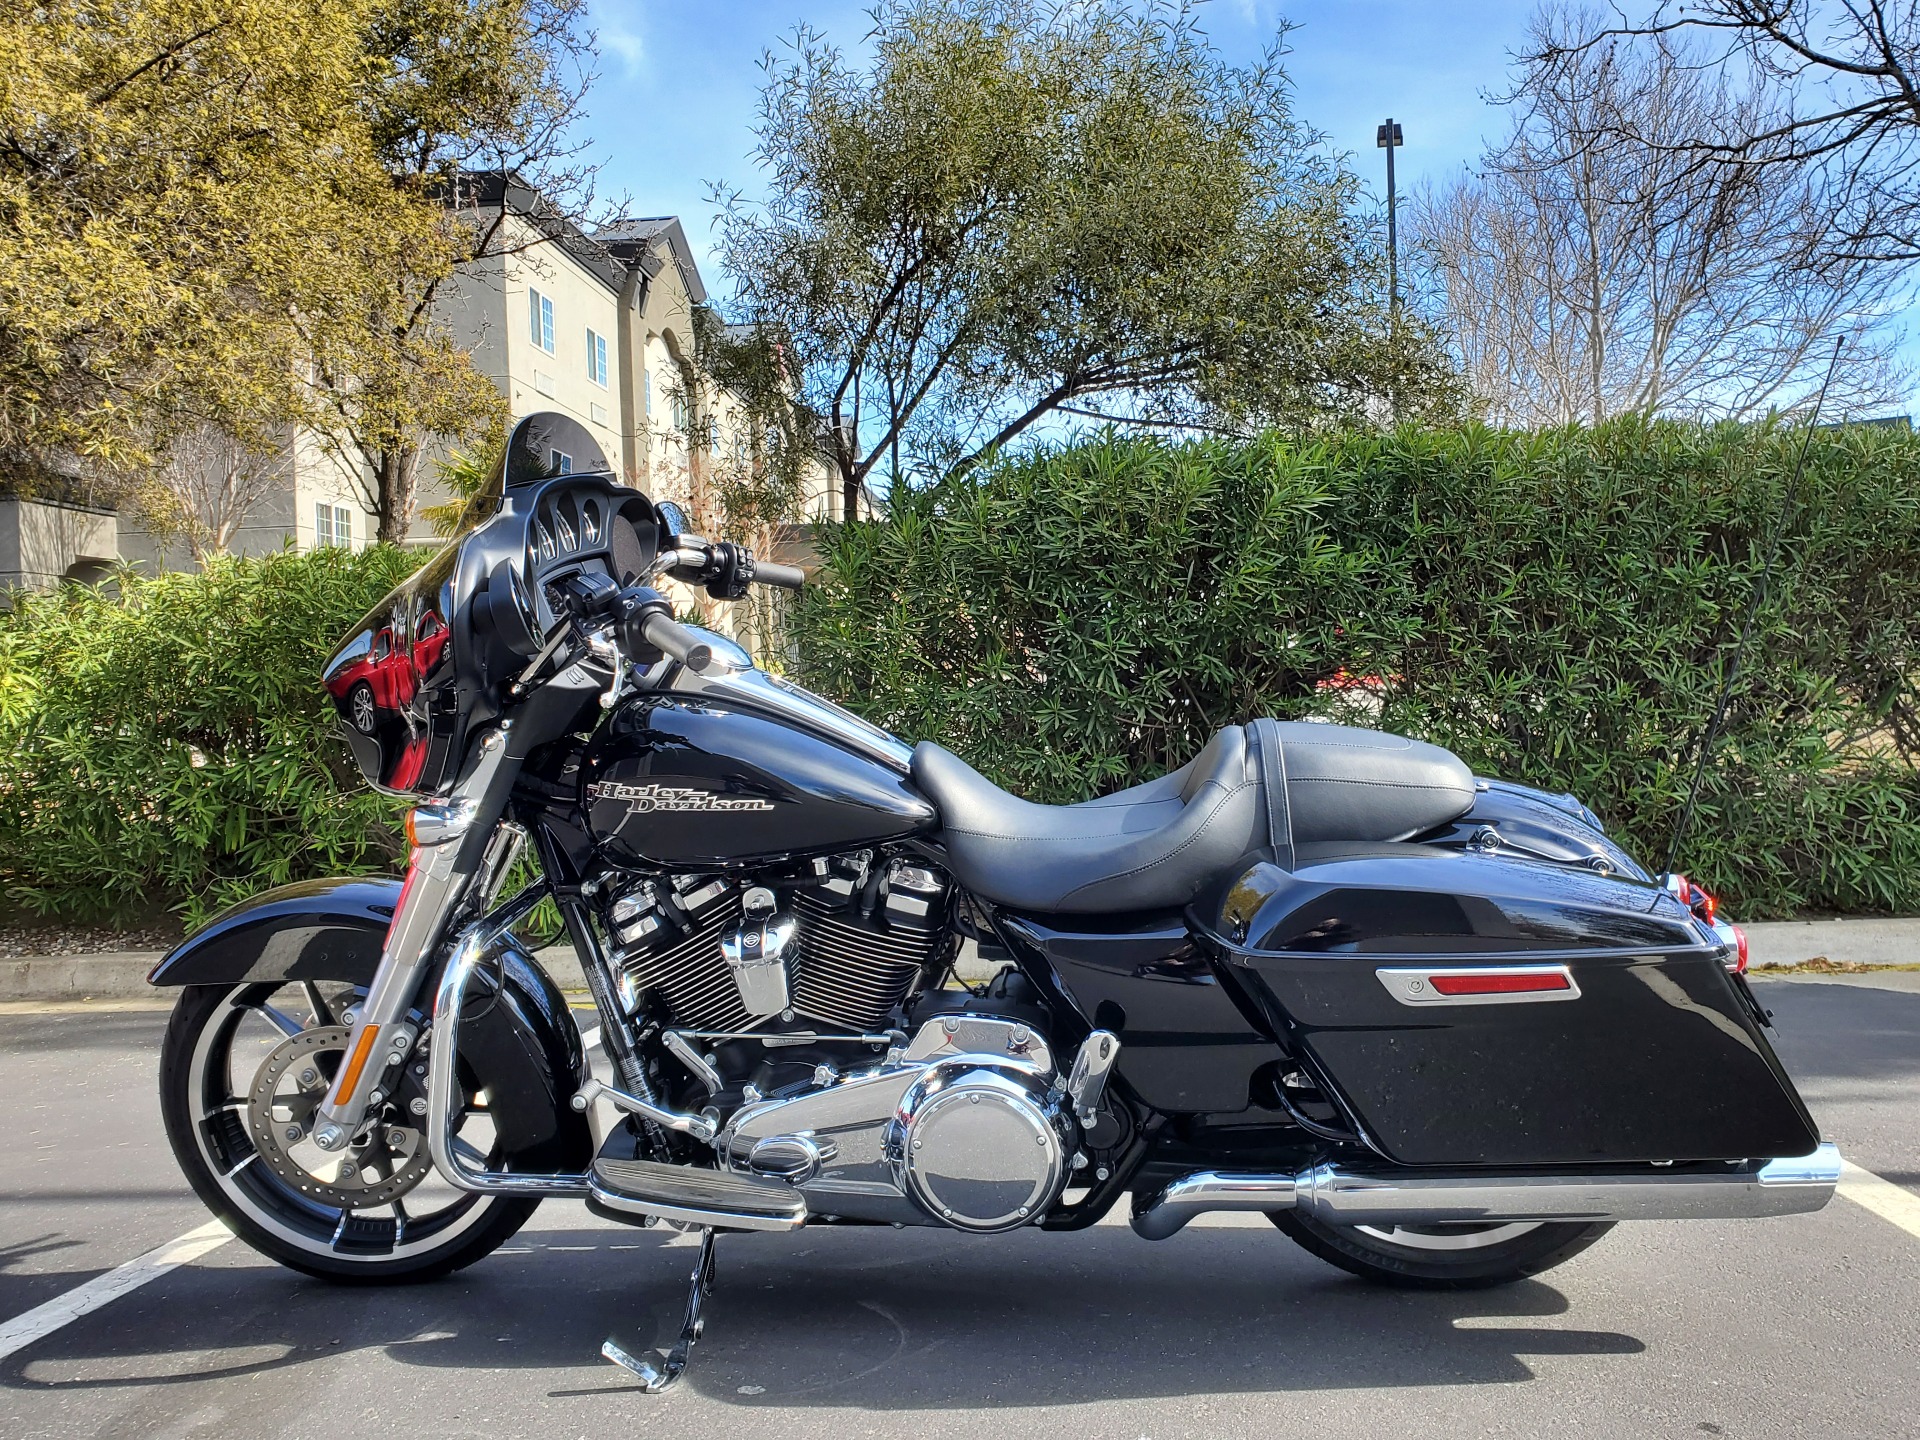 Used 2020 Harley Davidson Street Glide Vivid Black Motorcycles In Livermore Ca 647021